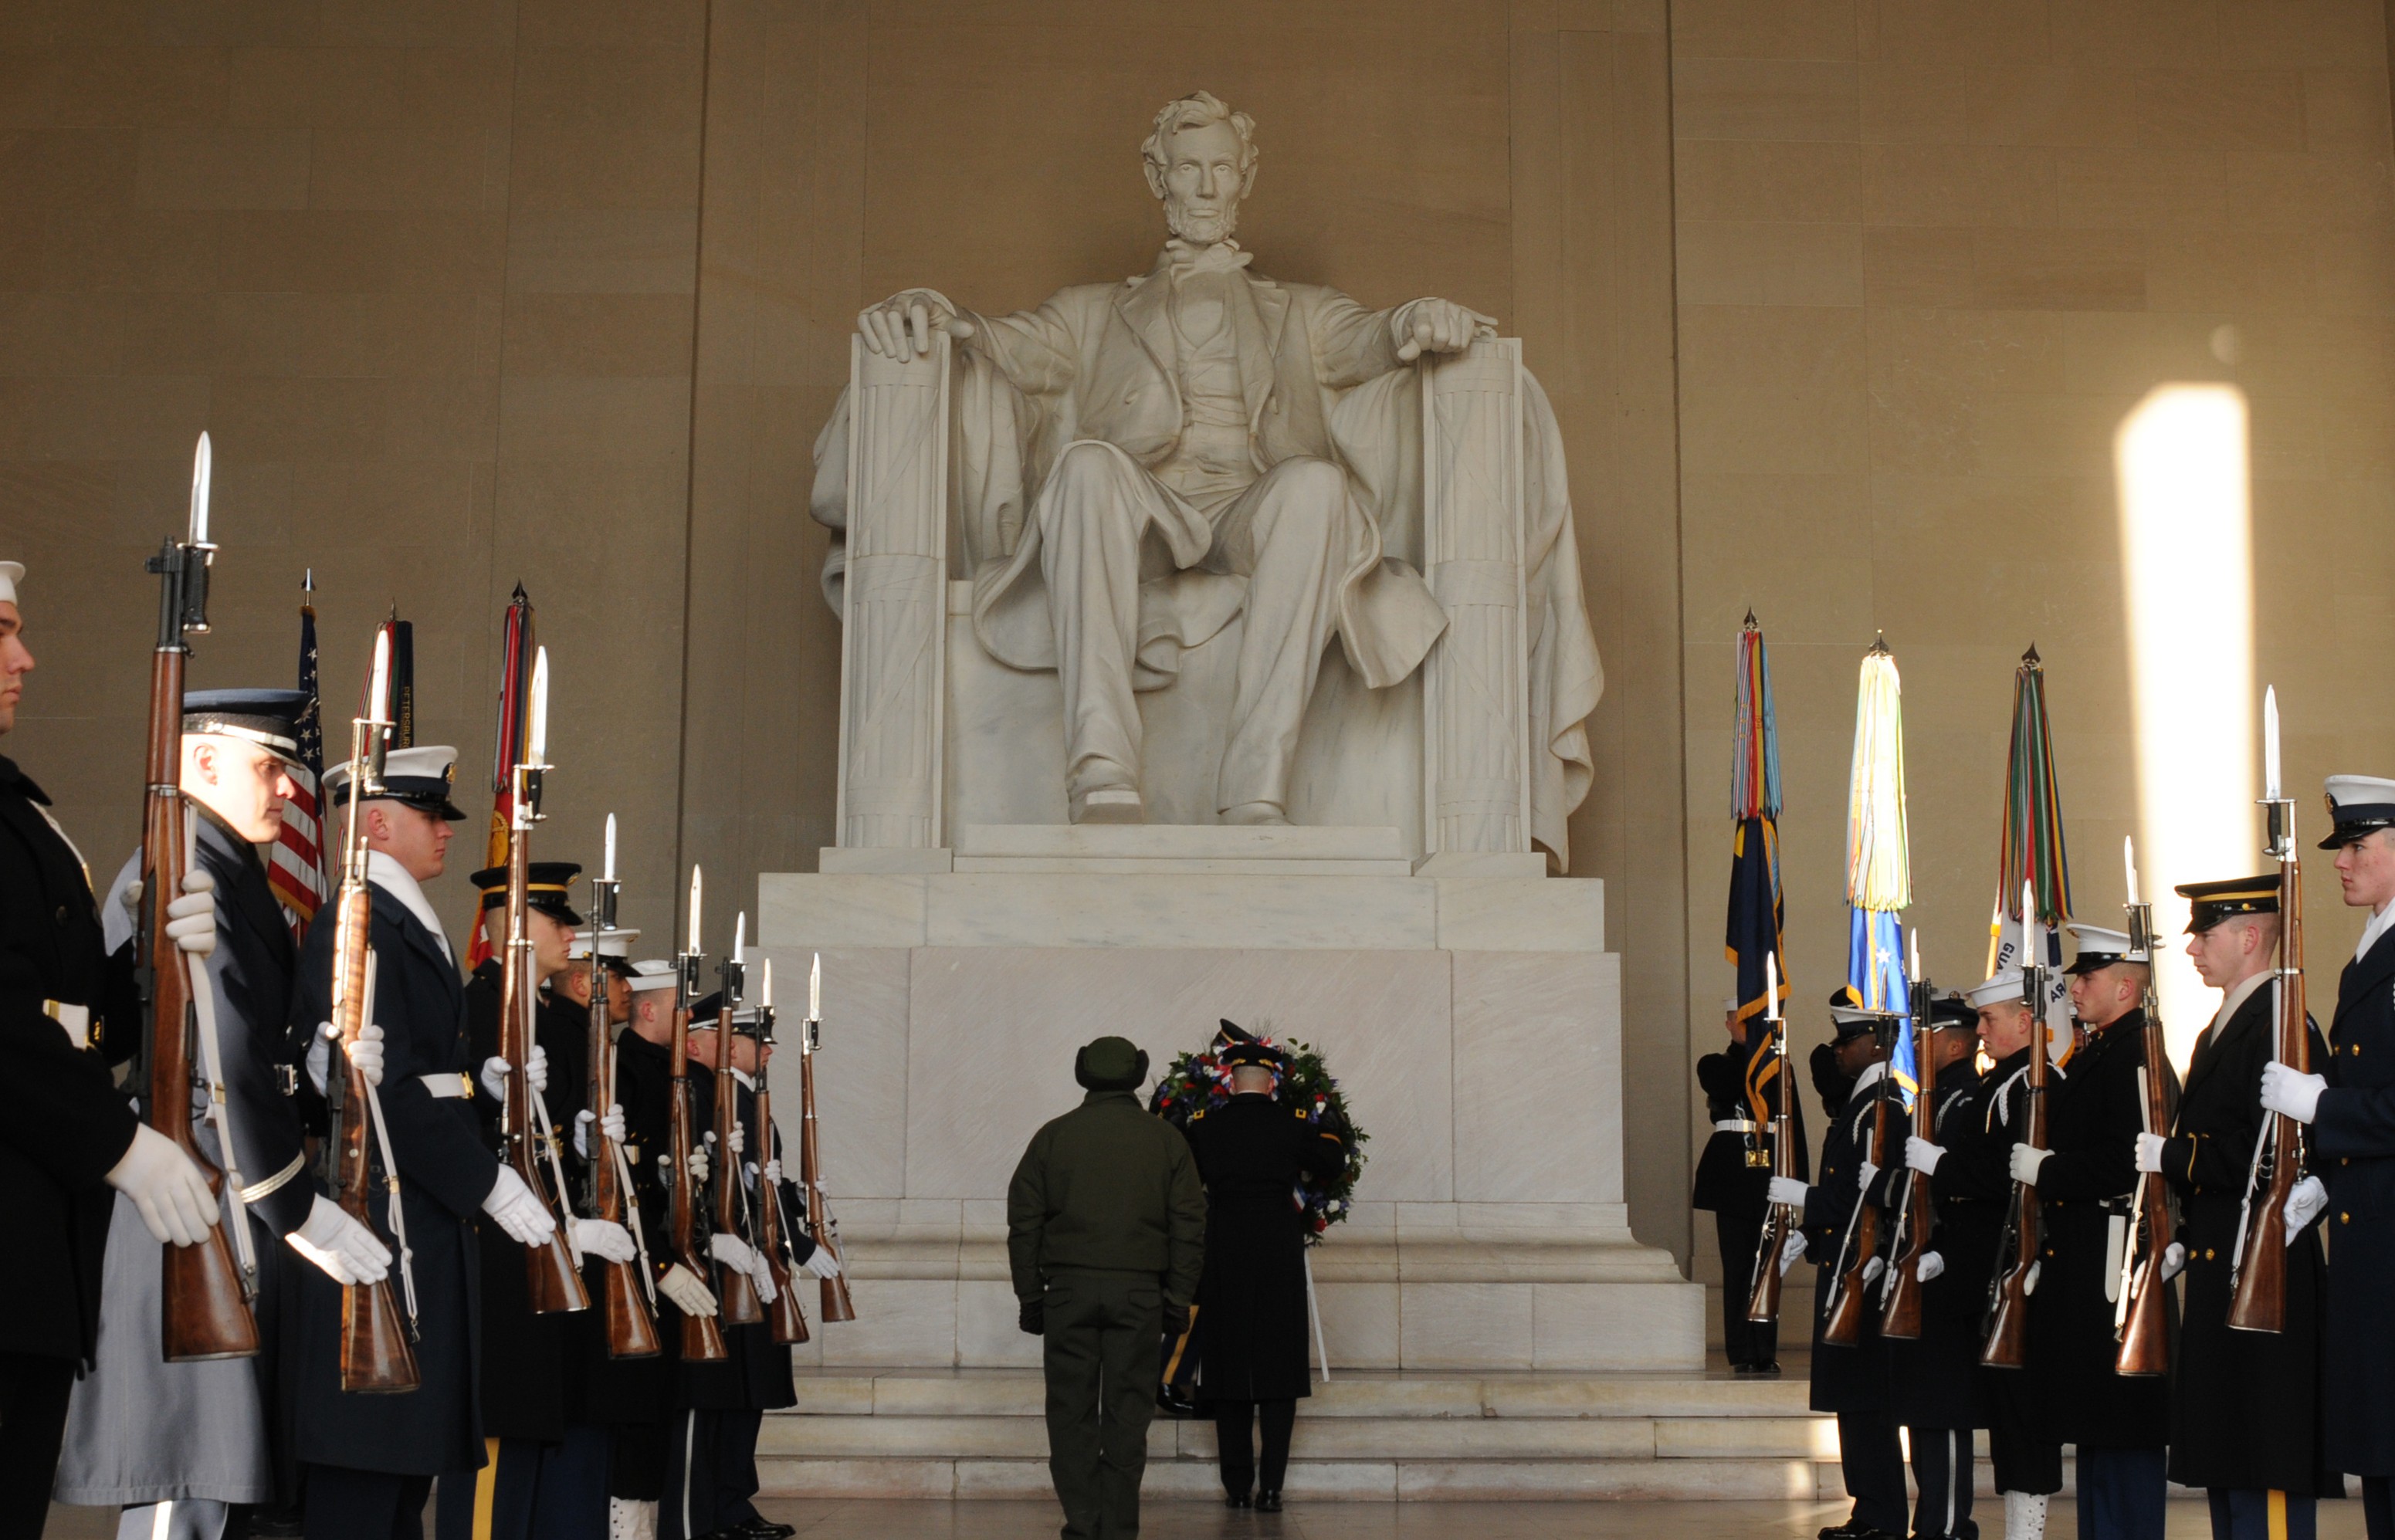 Abraham Lincoln Wreath Ceremony | Article | The United States Army